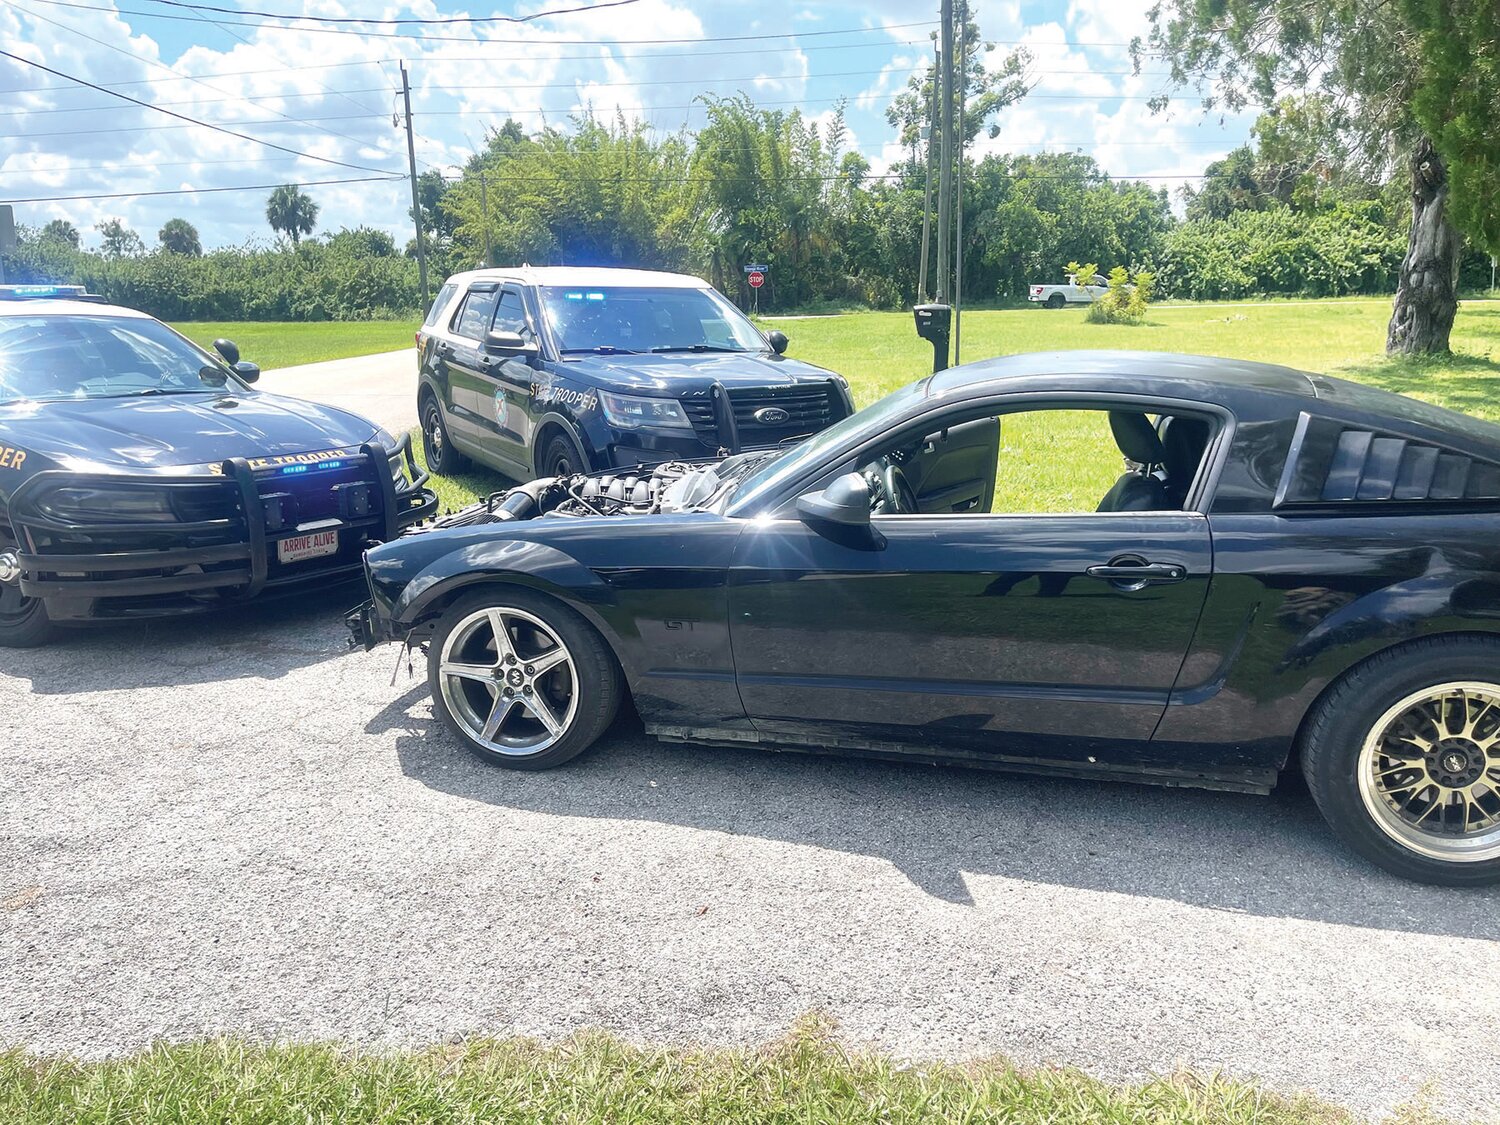 Side view of the black Ford Mustang. The silver strips were painted over.